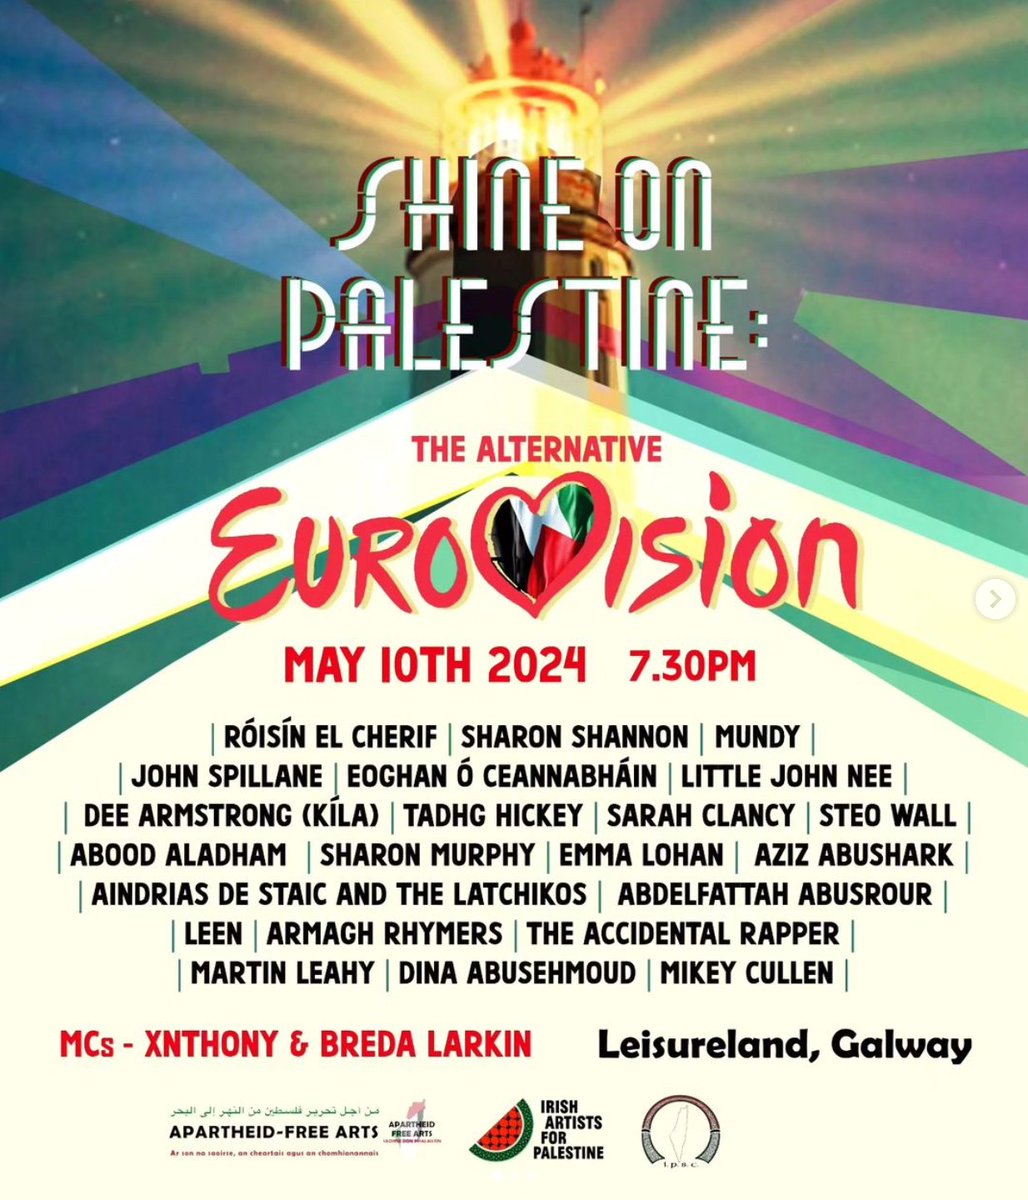 If you're conflicted about #Eurovision- the great party for the sublime, the ridiculous and the g3nocida£- please consider supporting @ApartFreeArts' excellent Alternative Eurovision in Dublin & Galway this Friday 10th May, hosted by @PantiBliss / @xnthony #TheLineUpTho 😍 Link👇